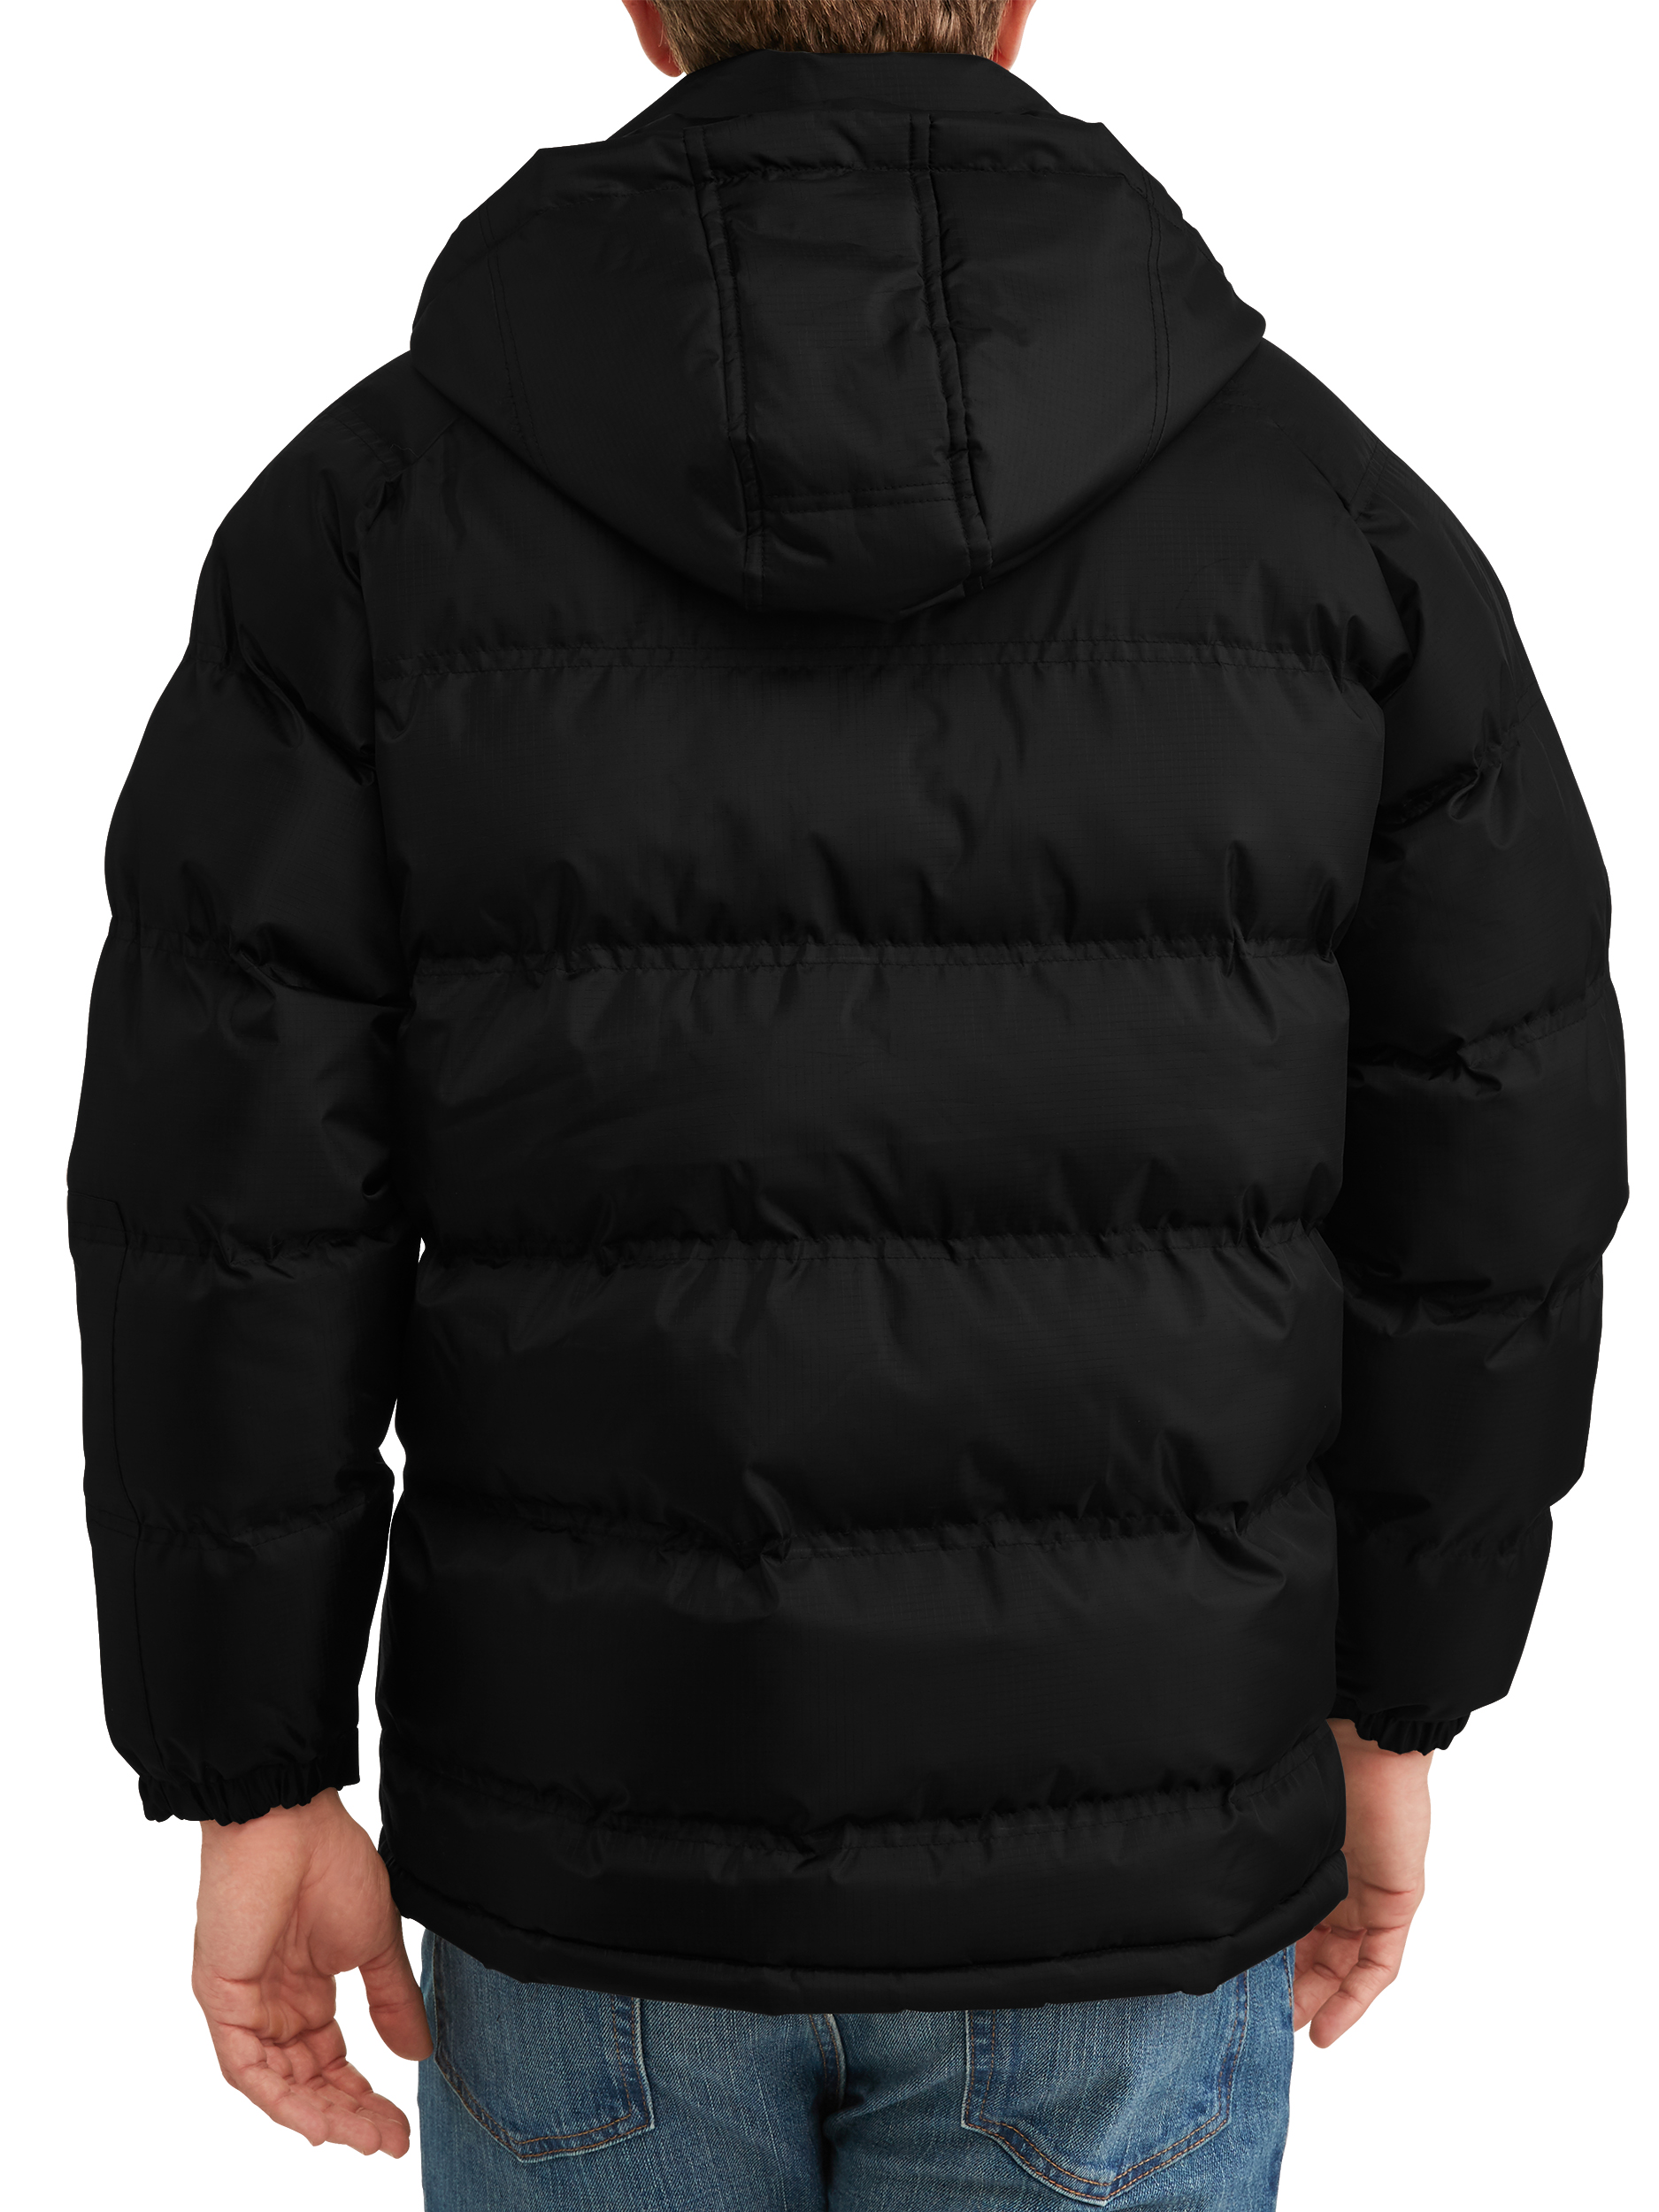 Climate Concepts Men's Full Zip Hooded Rip Stop Midweight Jacket - image 4 of 4